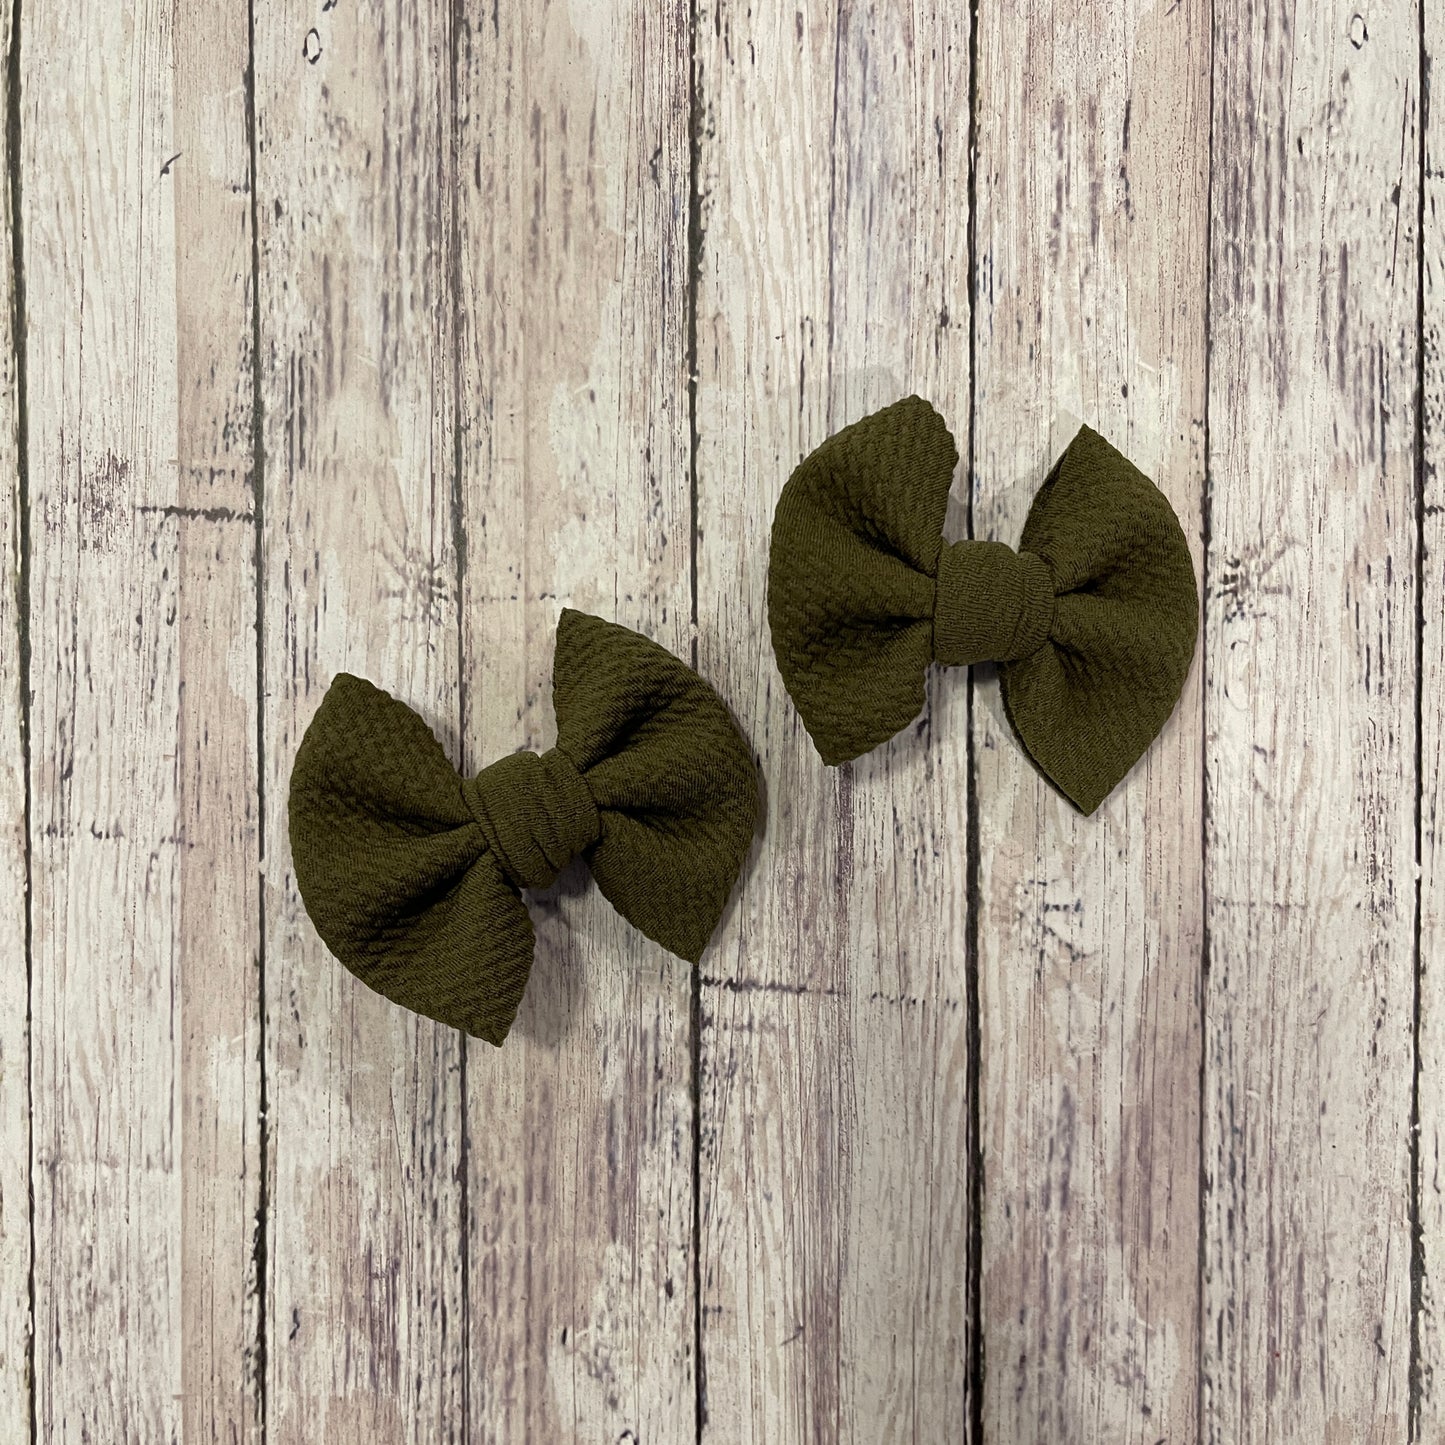 Baby Girl Bows - Olive